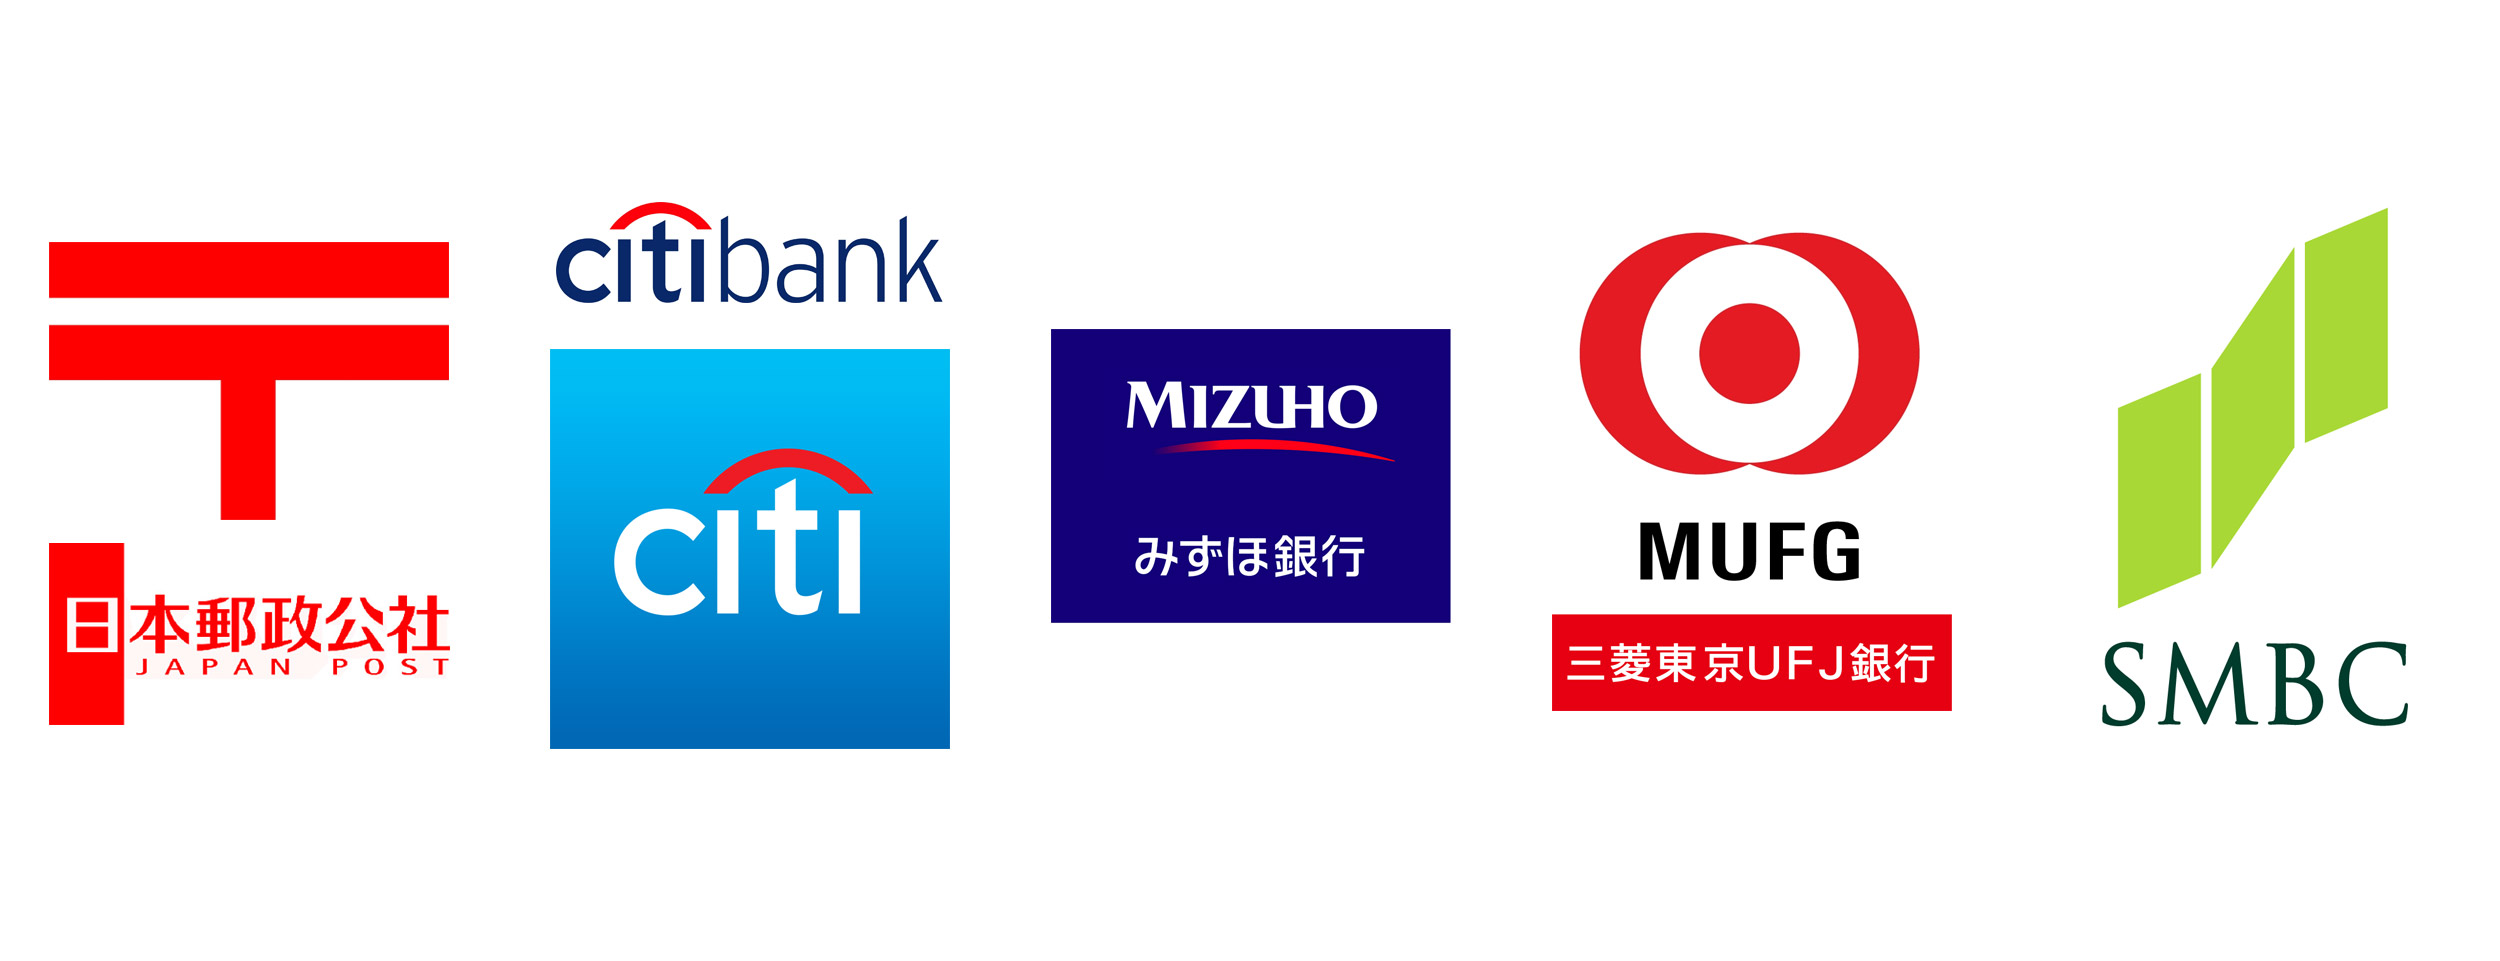 Bank cards in Japan: ending of the puzzle - Visa/Mastercard and Japanese ATM